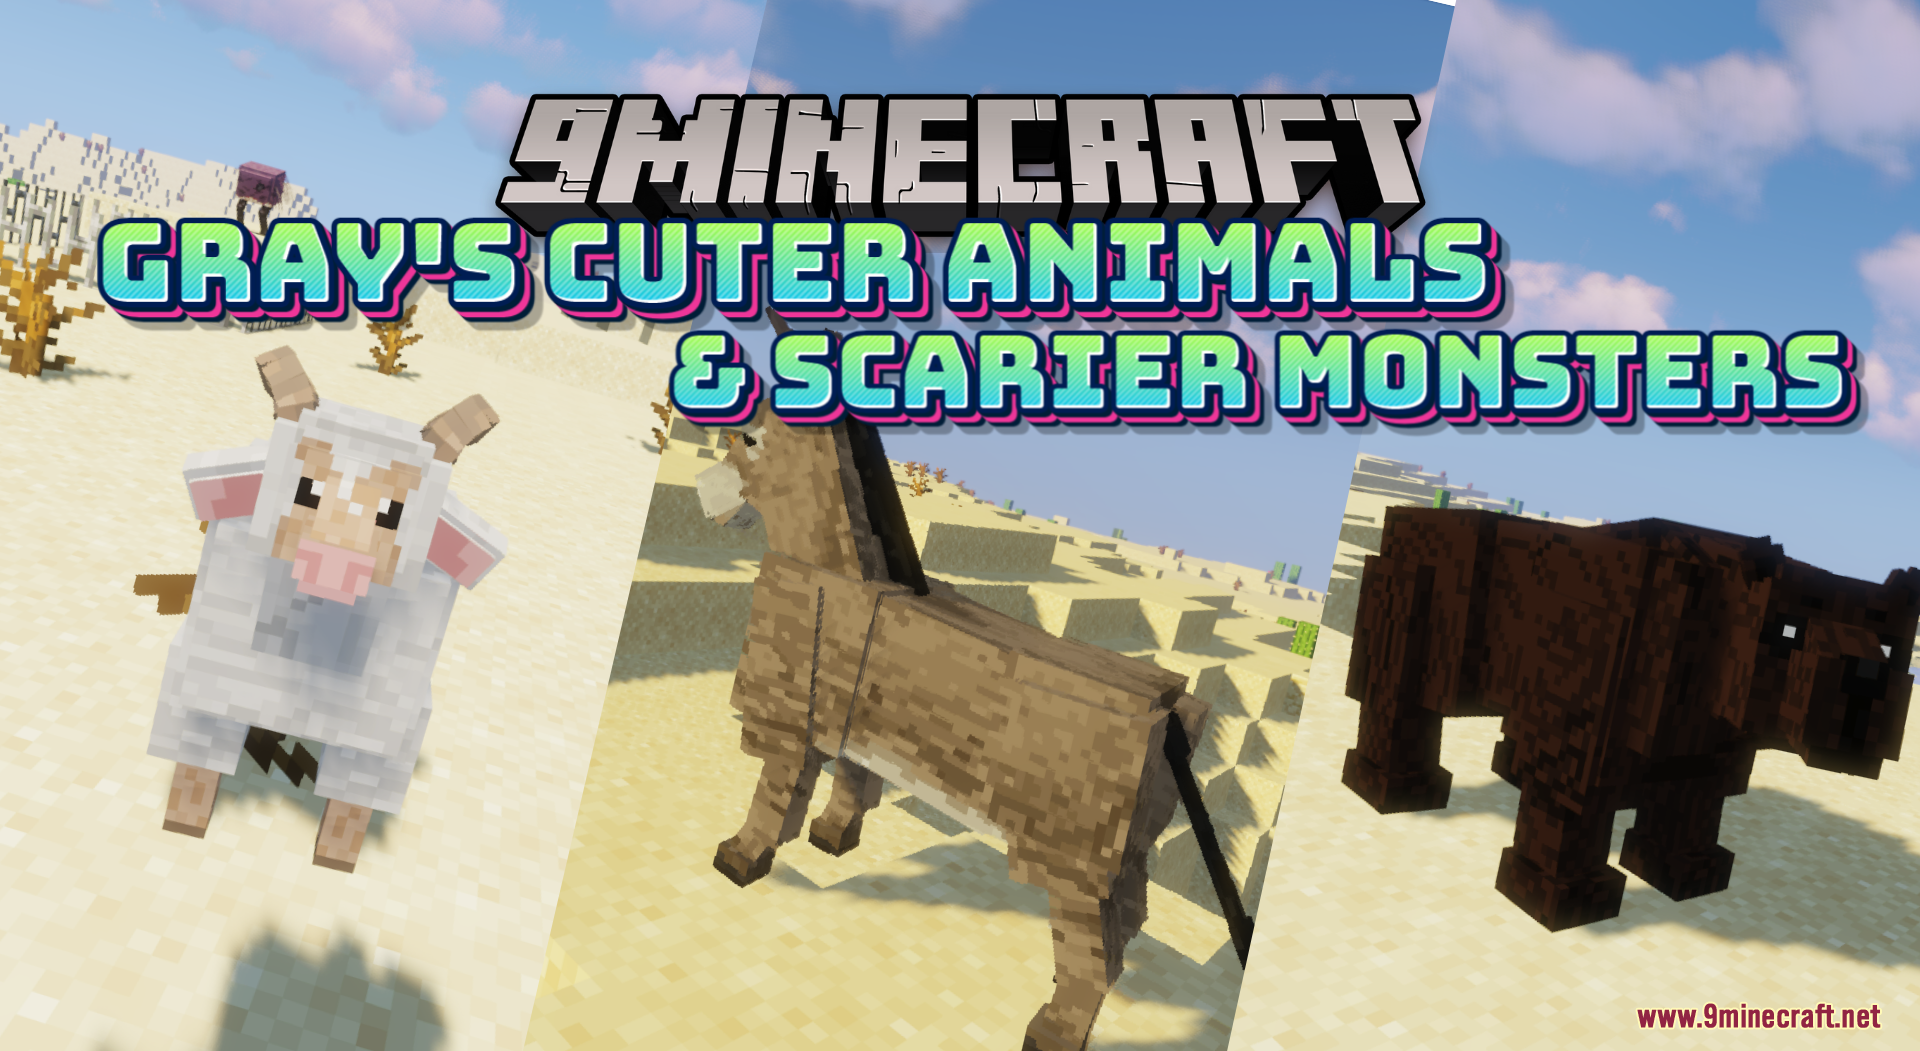 minecraft realistic animal texture pack